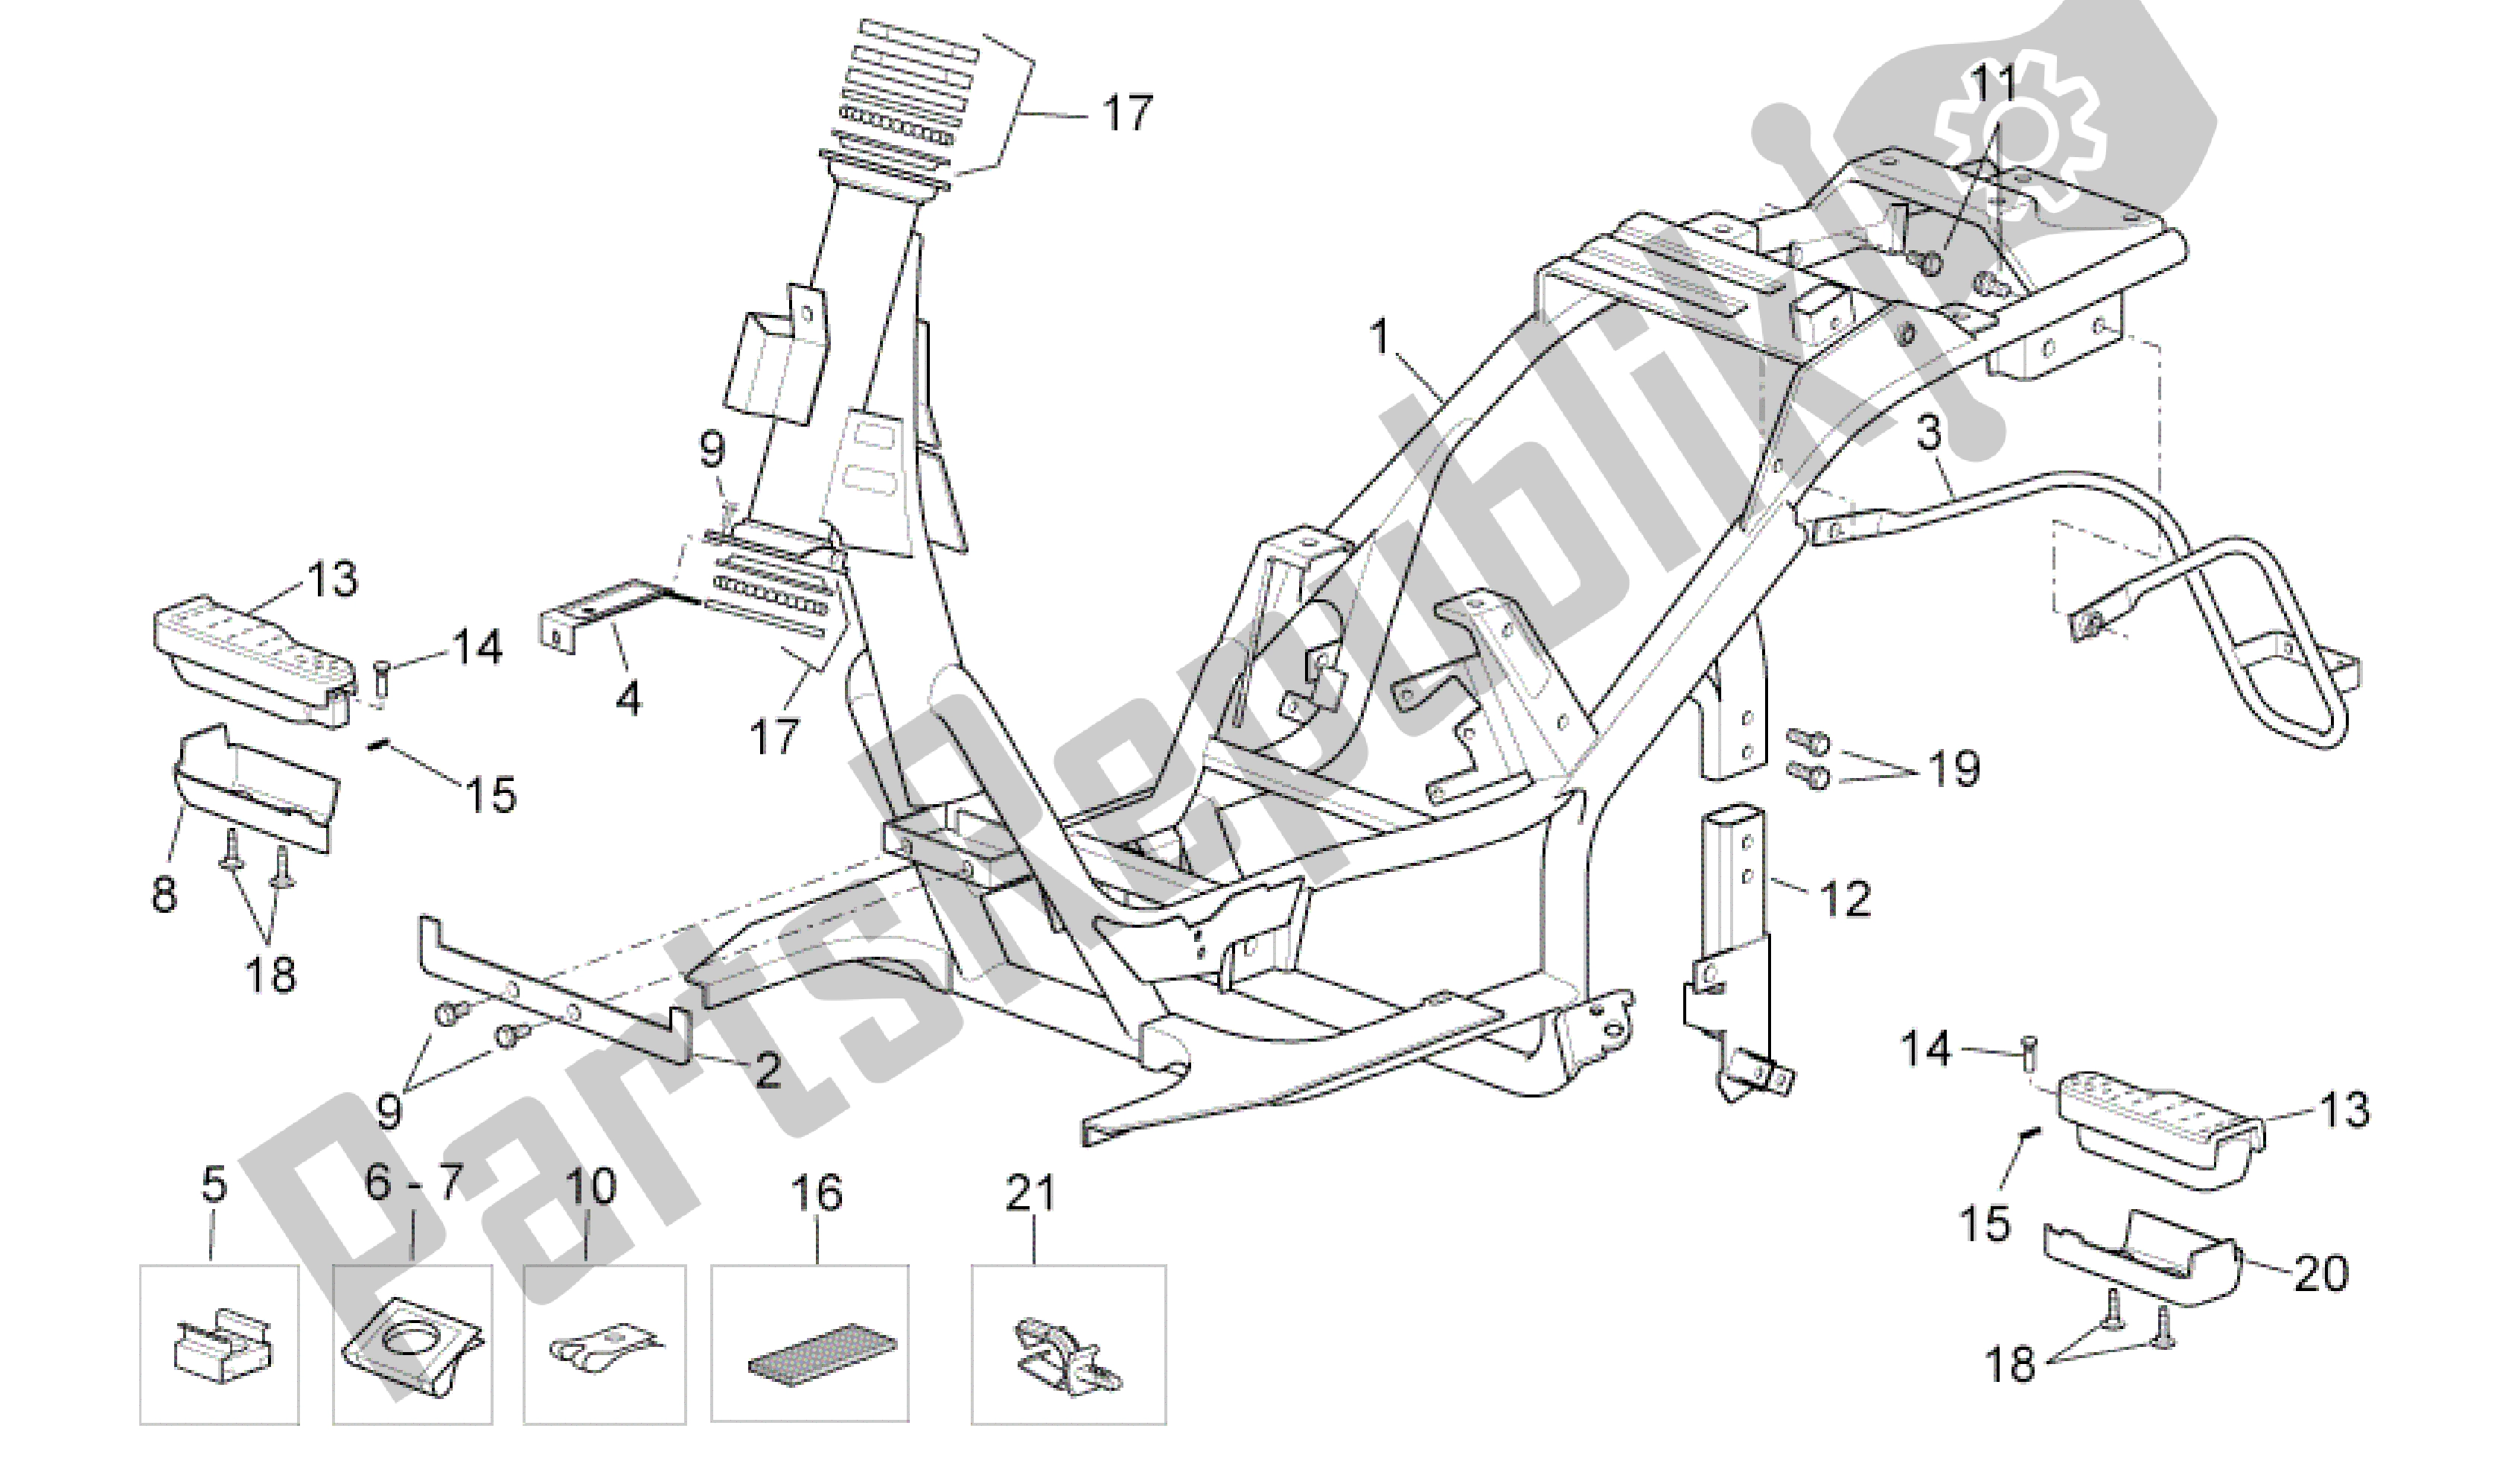 All parts for the Frame of the Aprilia Scarabeo 125 2004 - 2006